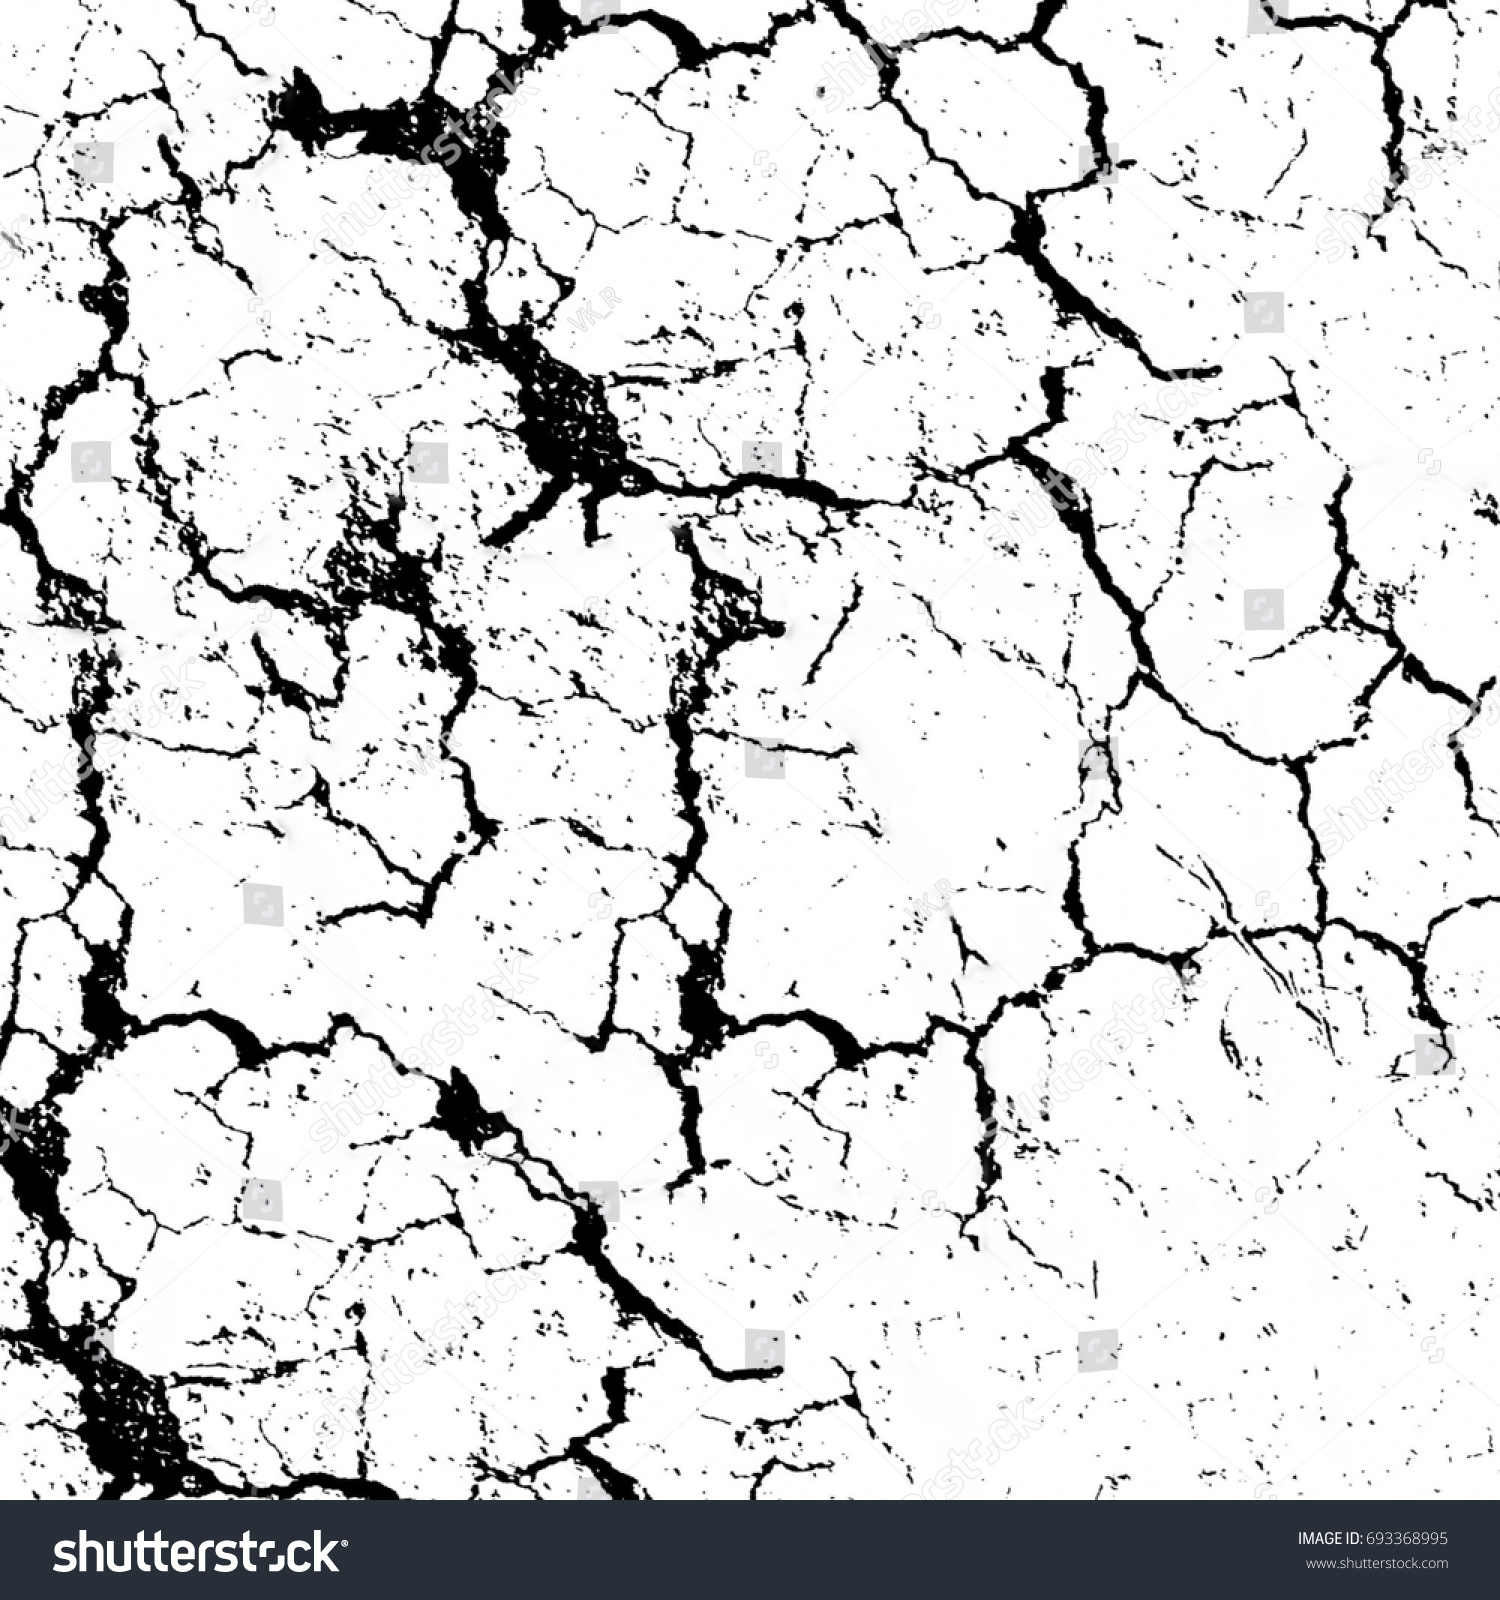 Abstract grunge background in black white #693368995